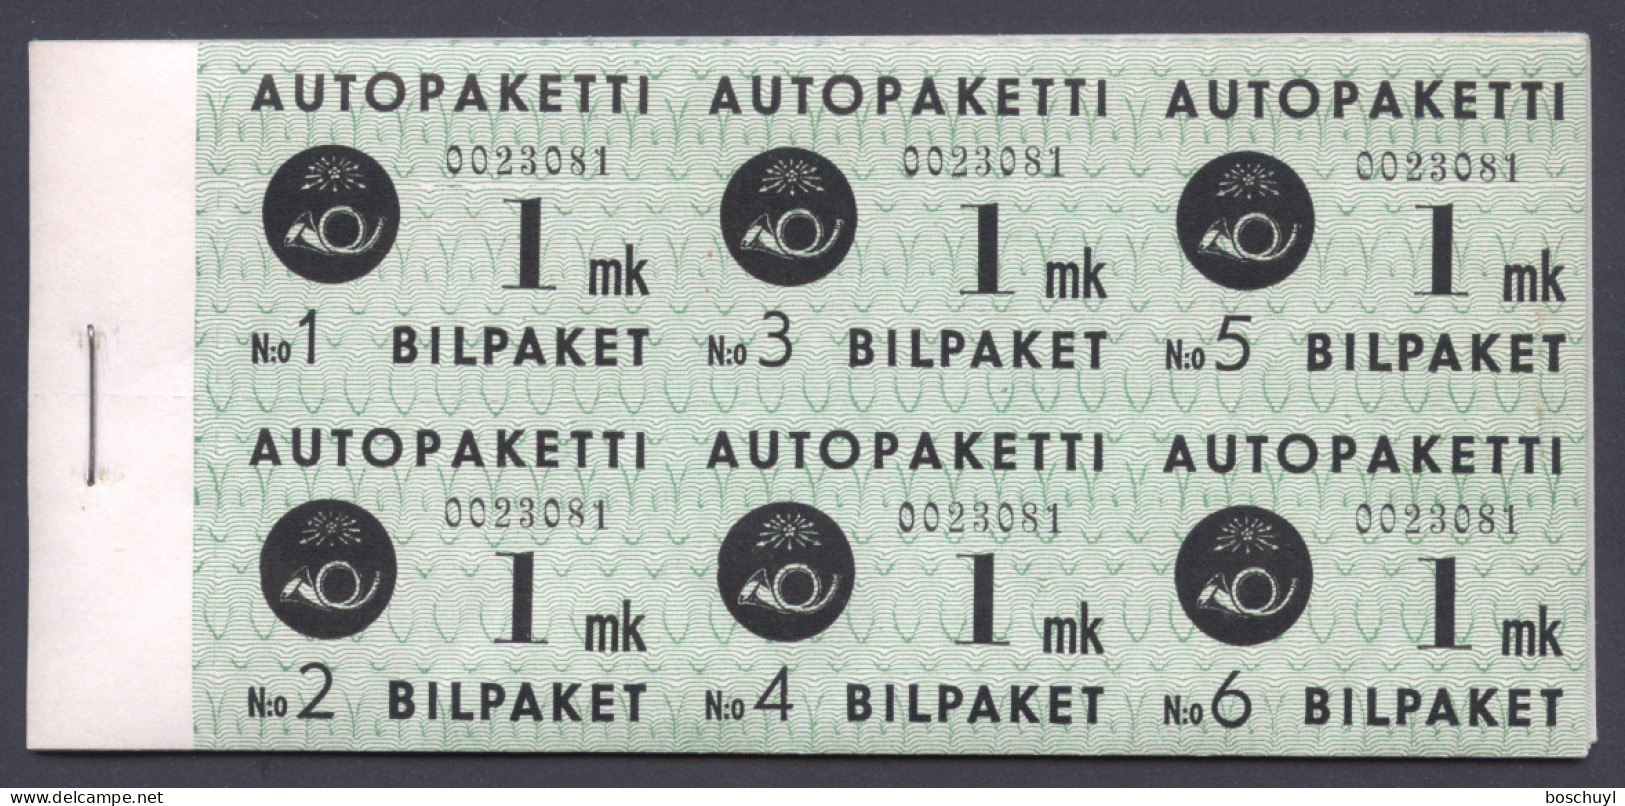 Finland, 1949, Autopaketti, Postcar Stamps, Booklet With 10 Panes Of 6 Stamps, MNH, Michel 1 - Postbuspakete